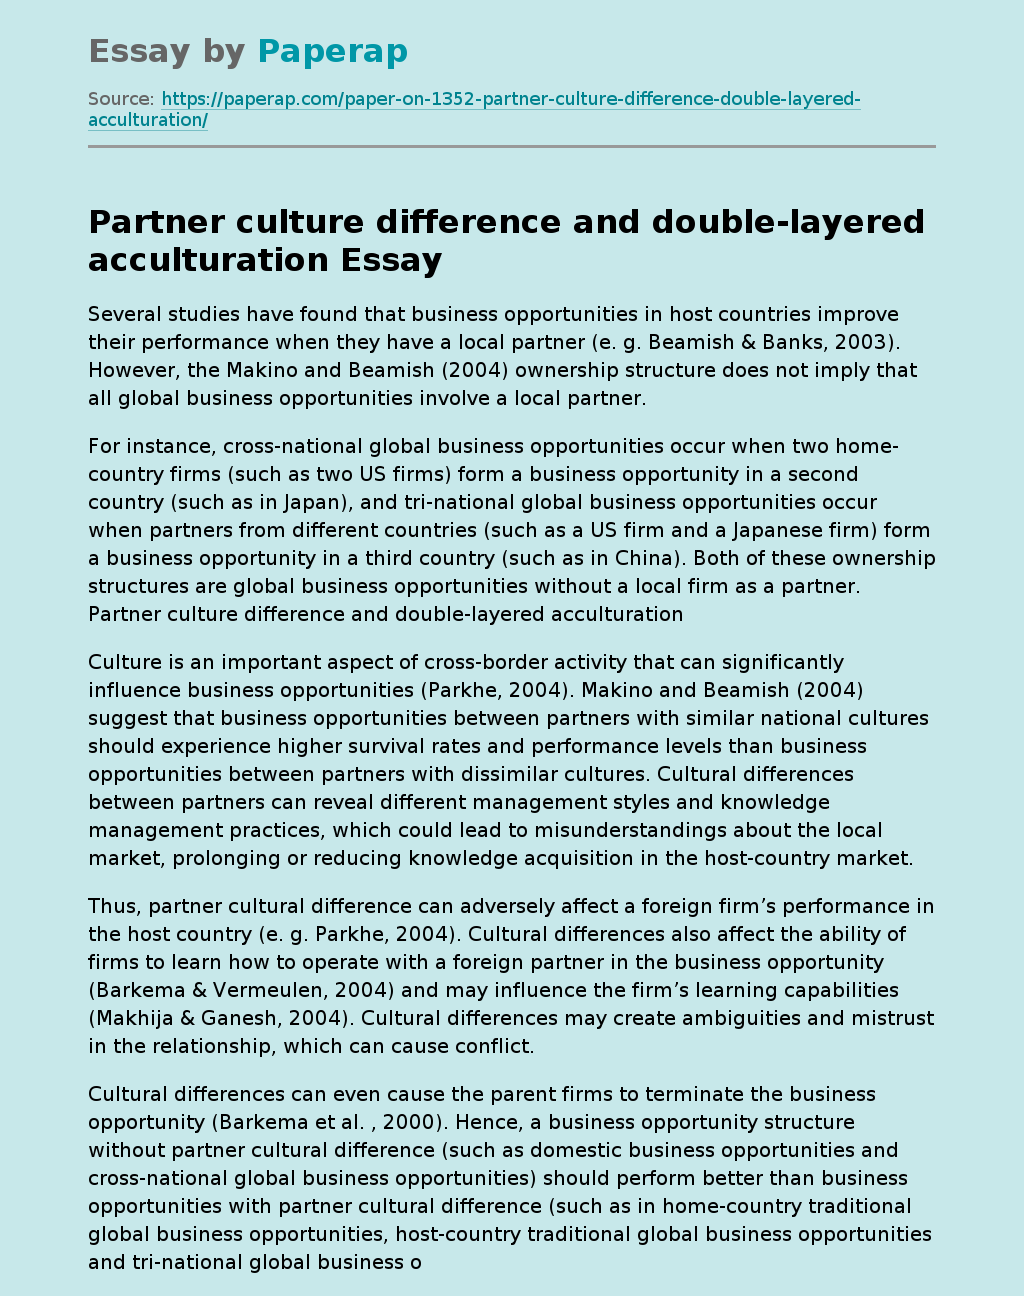 Partner Culture Difference and Double-layered Acculturation